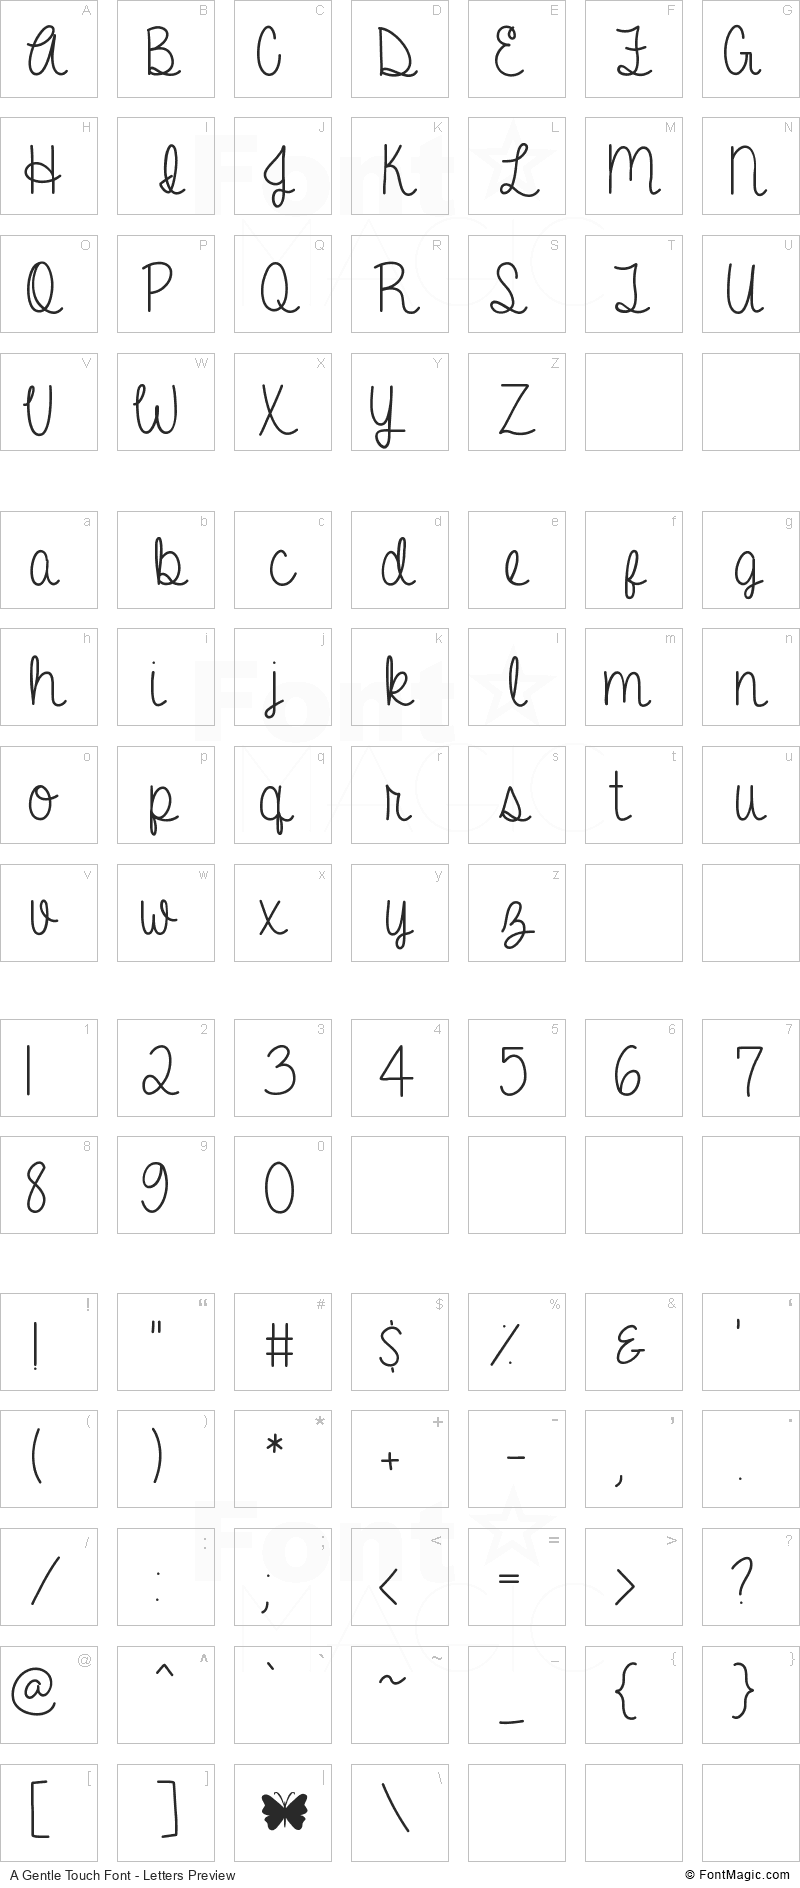 A Gentle Touch Font - All Latters Preview Chart